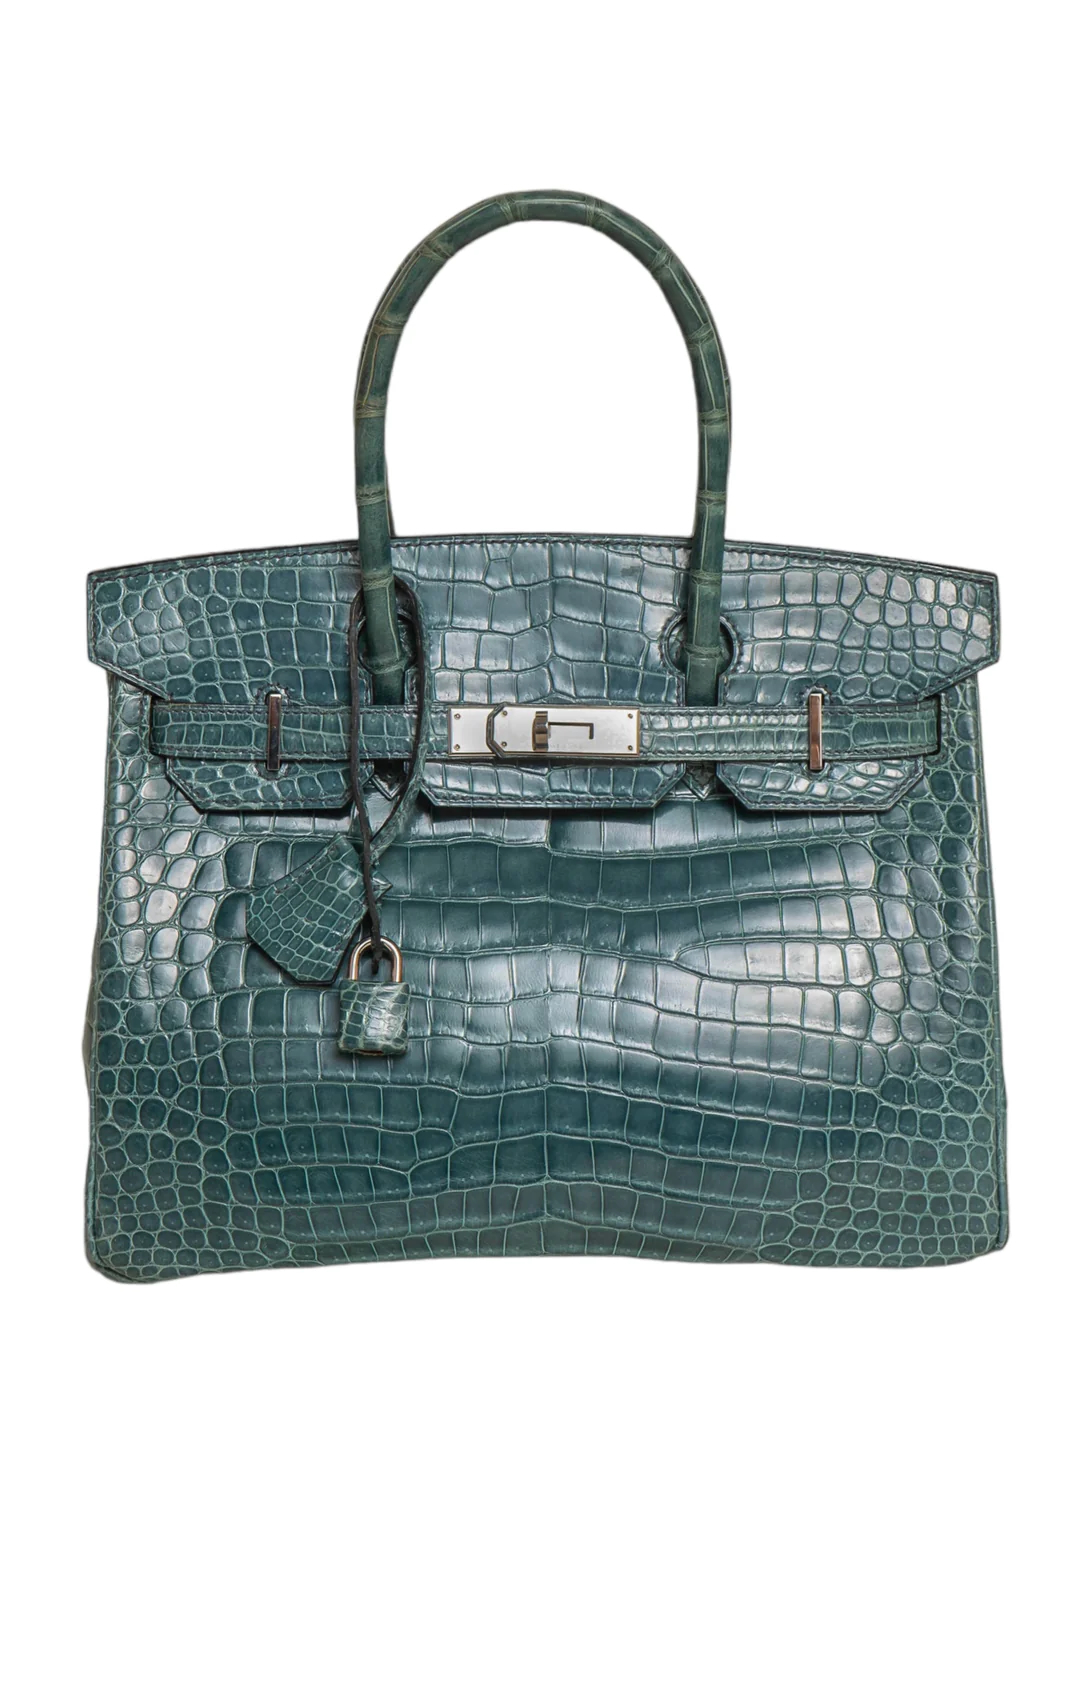 One big-ticket item is a rare Hermès Birkin bag, going for almost $50,000 used